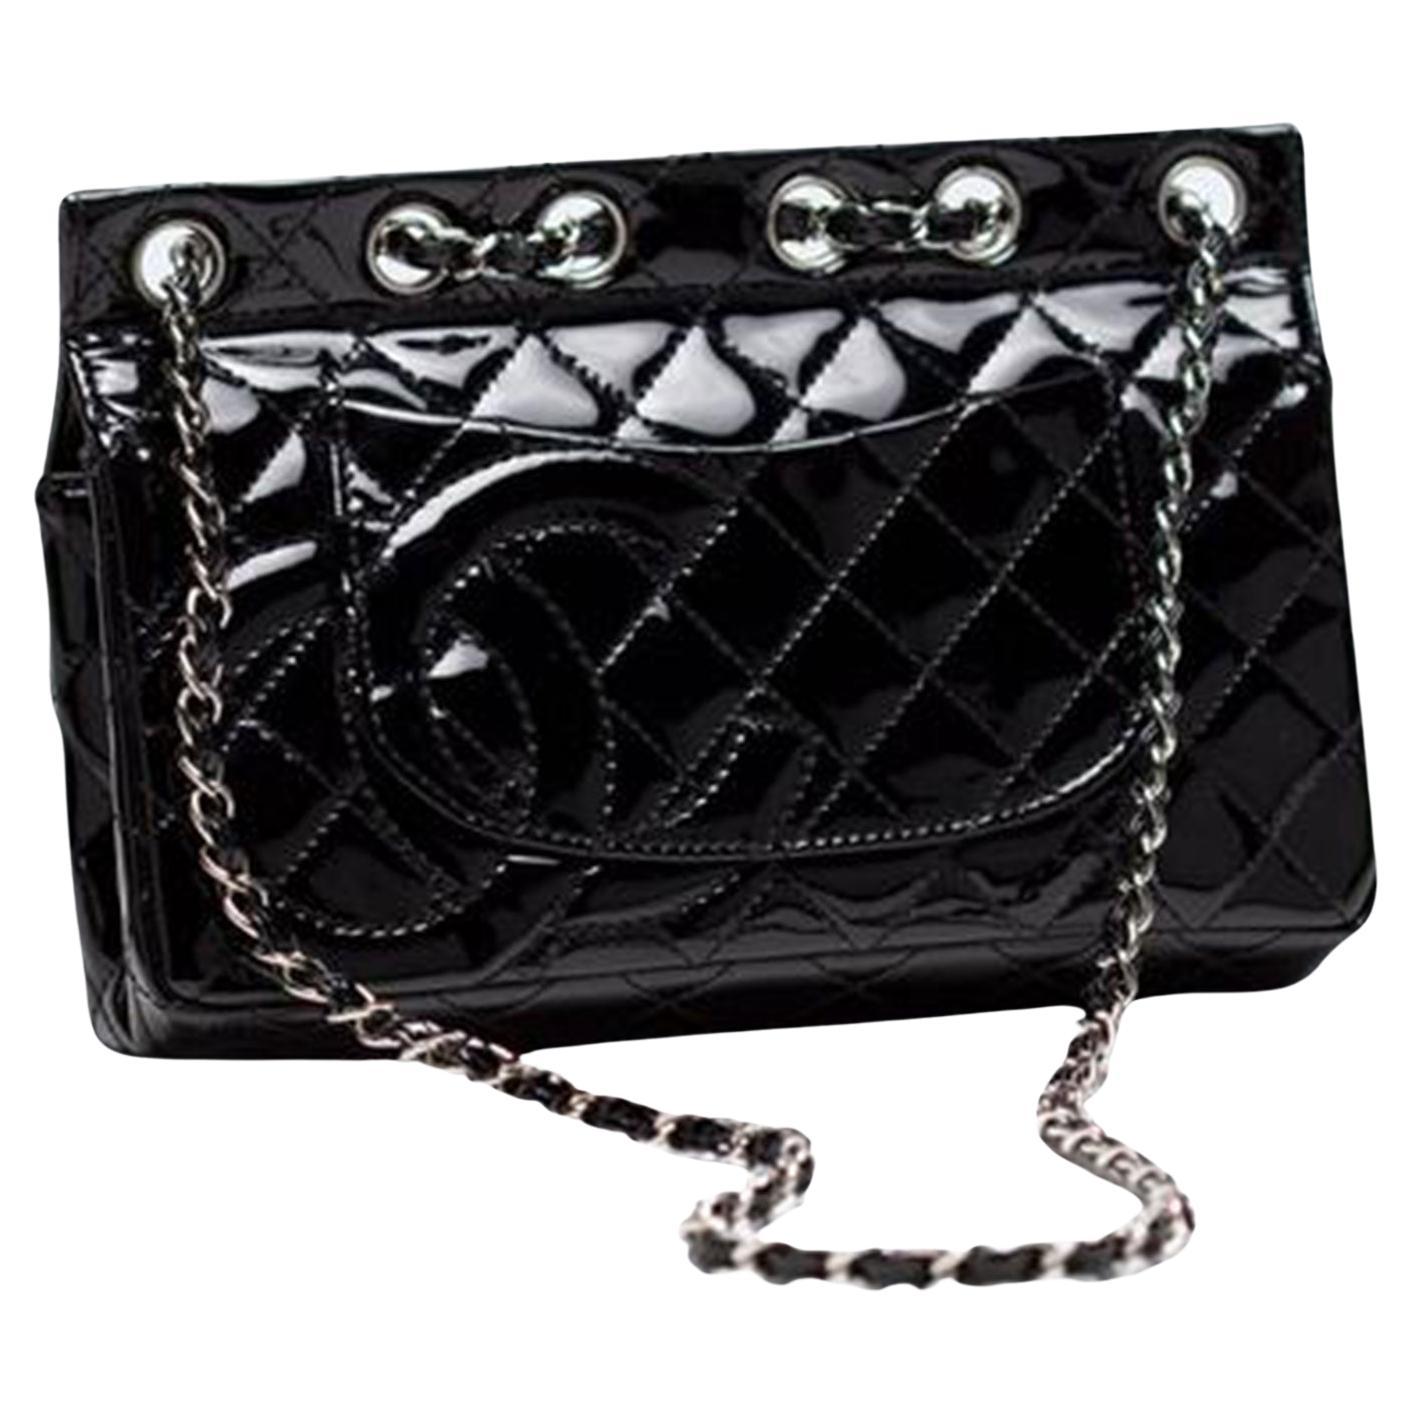 Chanel Classic Flap Supermodel Super Rare Quilted Black Patent Leather Bag For Sale 5